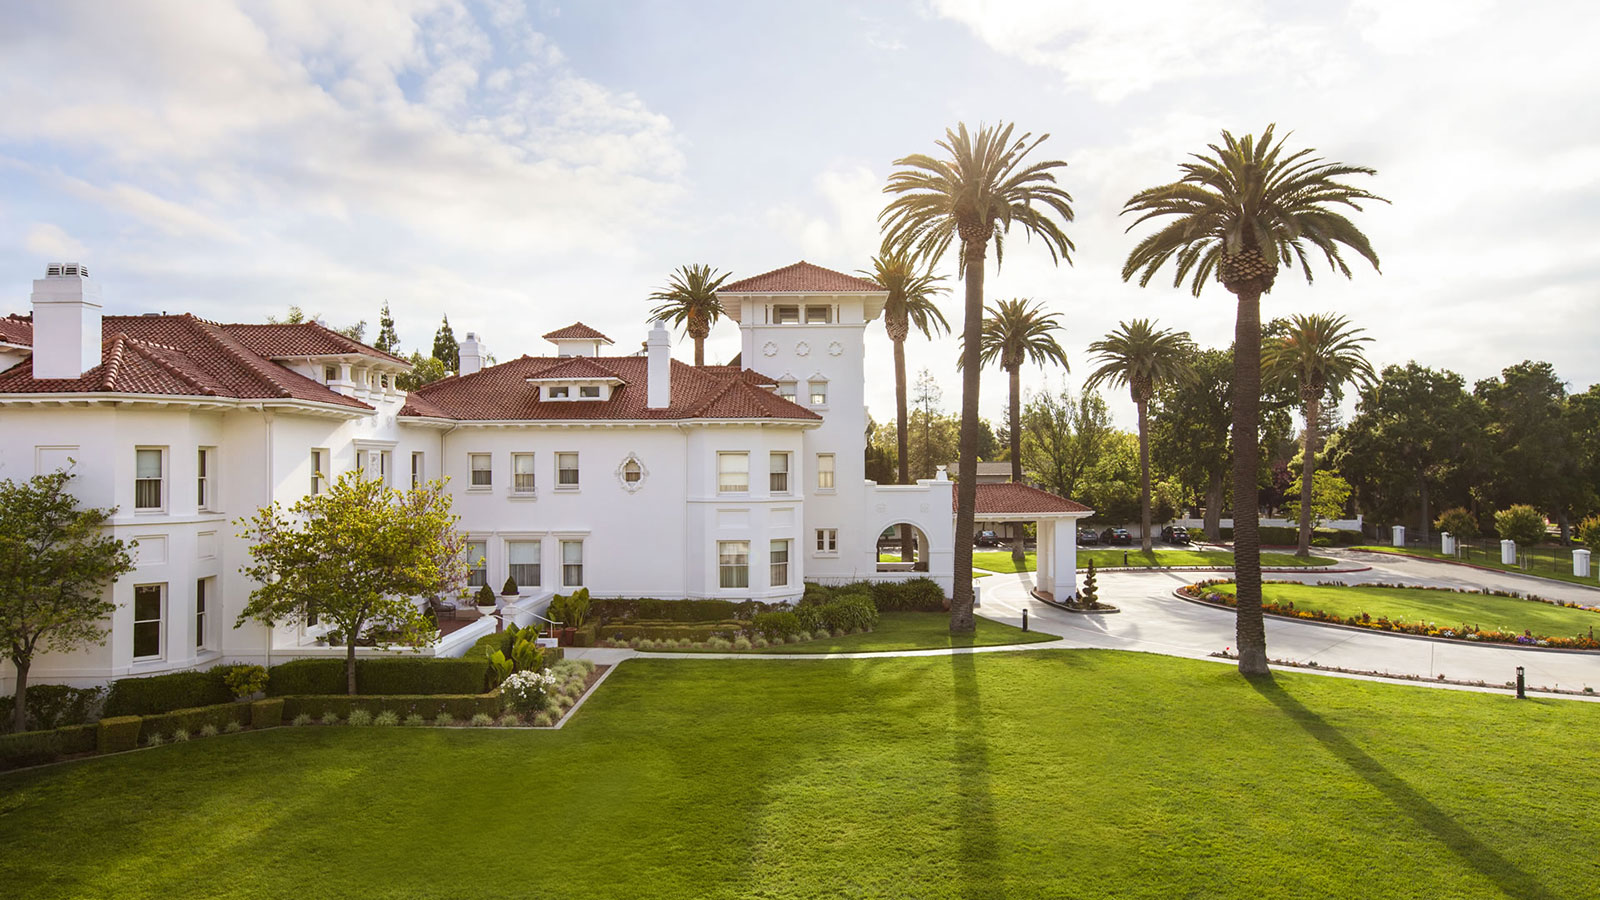 Discover the Mediterranean Revival-style architecture of Hayes Mansion San Jose, Curio Collection by Hilton.